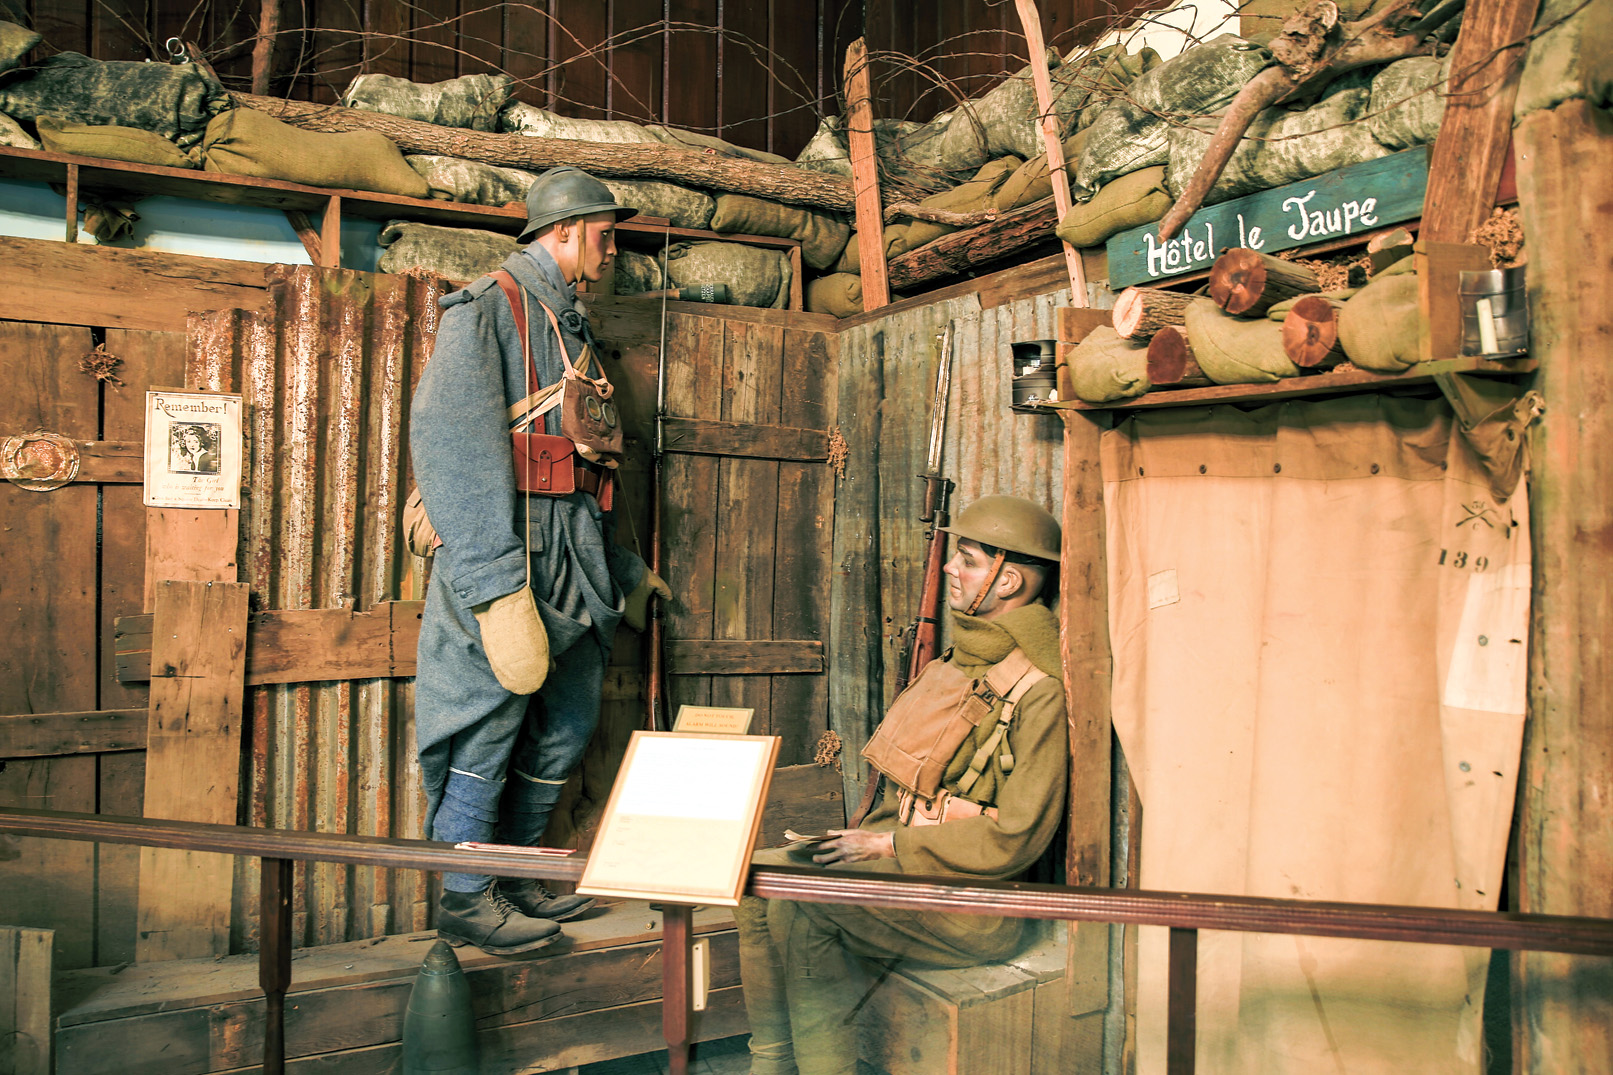 Packed into the 27,000 sq. ft. of exhibit space is this full-size diorama of a WWI trench scene depicting what life was like “at the front.” 